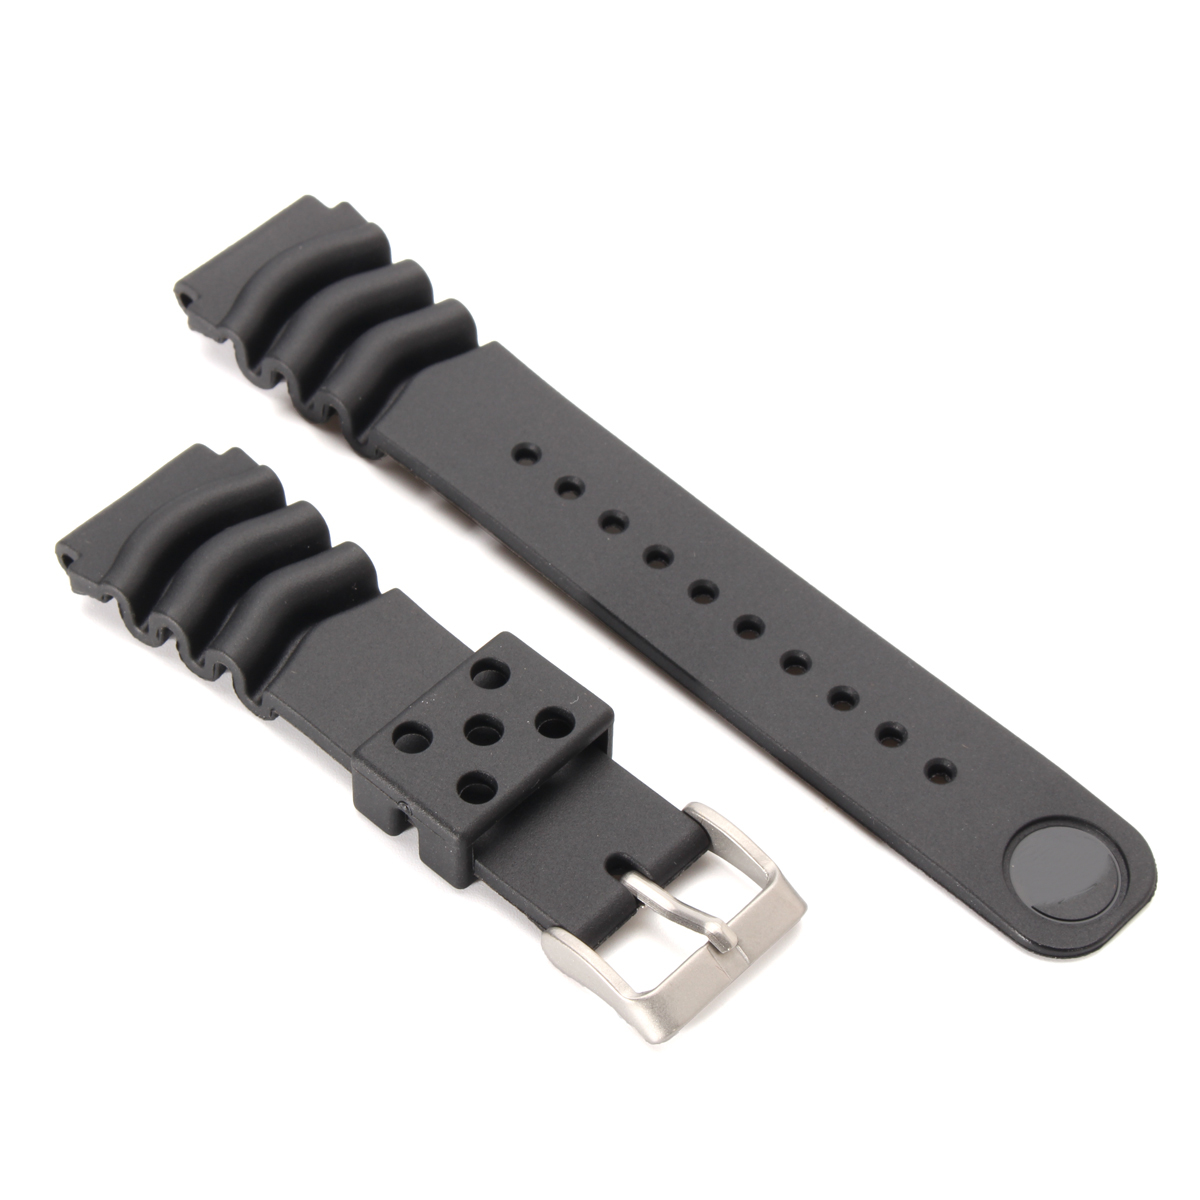 

22mm Replacement Black Buckle Wrist Band Strap for SEIKO DIVER'S Watch